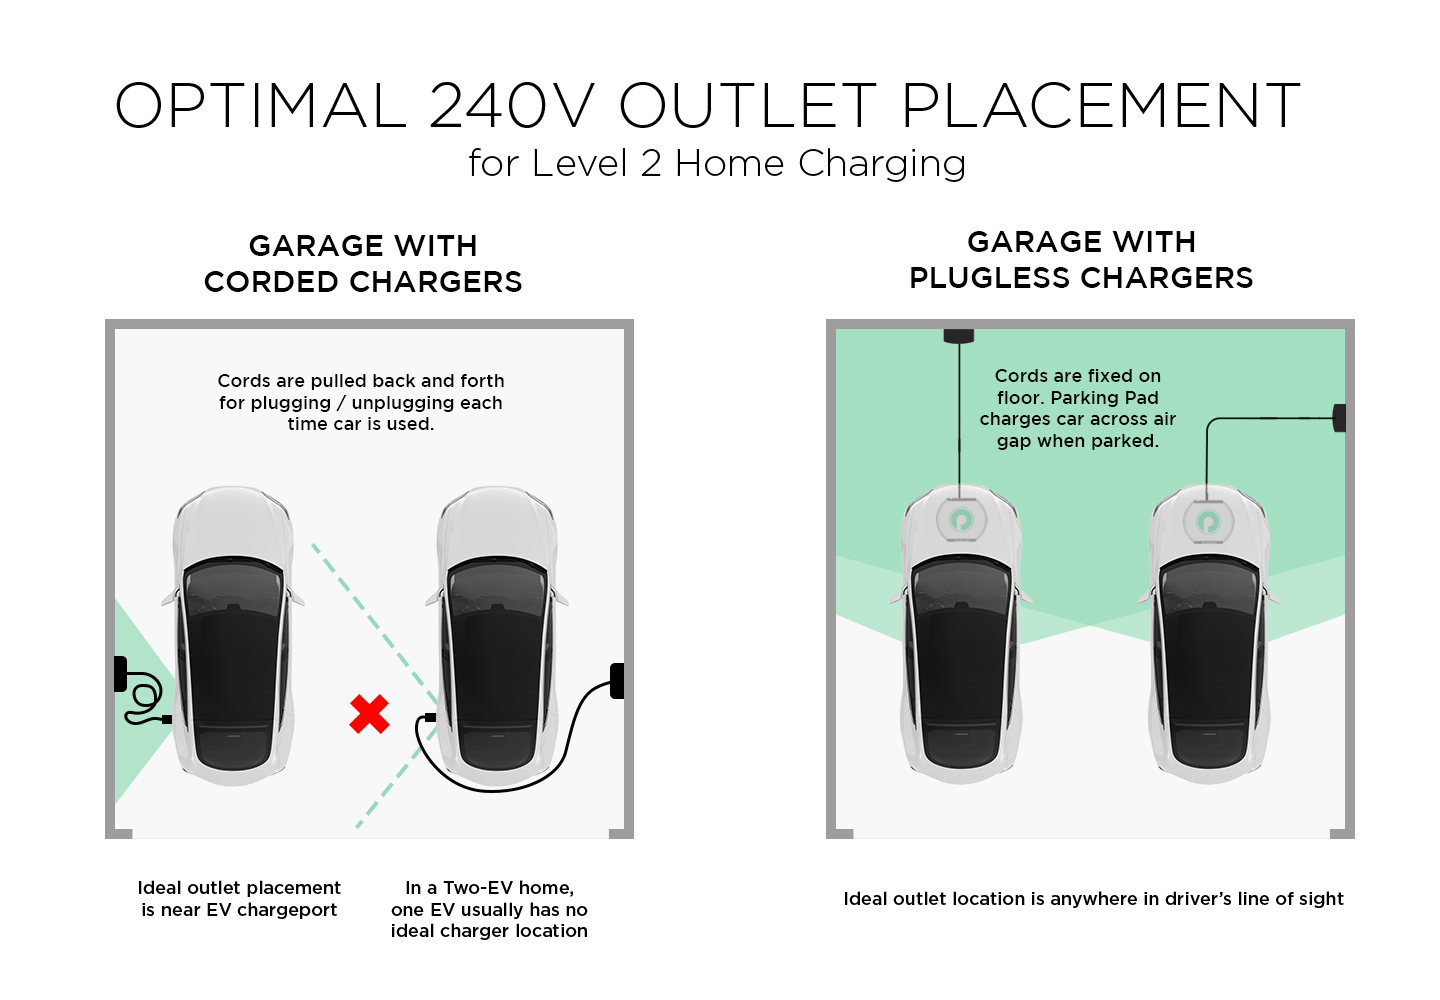 How to Avoid Common Pitfalls with Level 2 EV Charger Installation